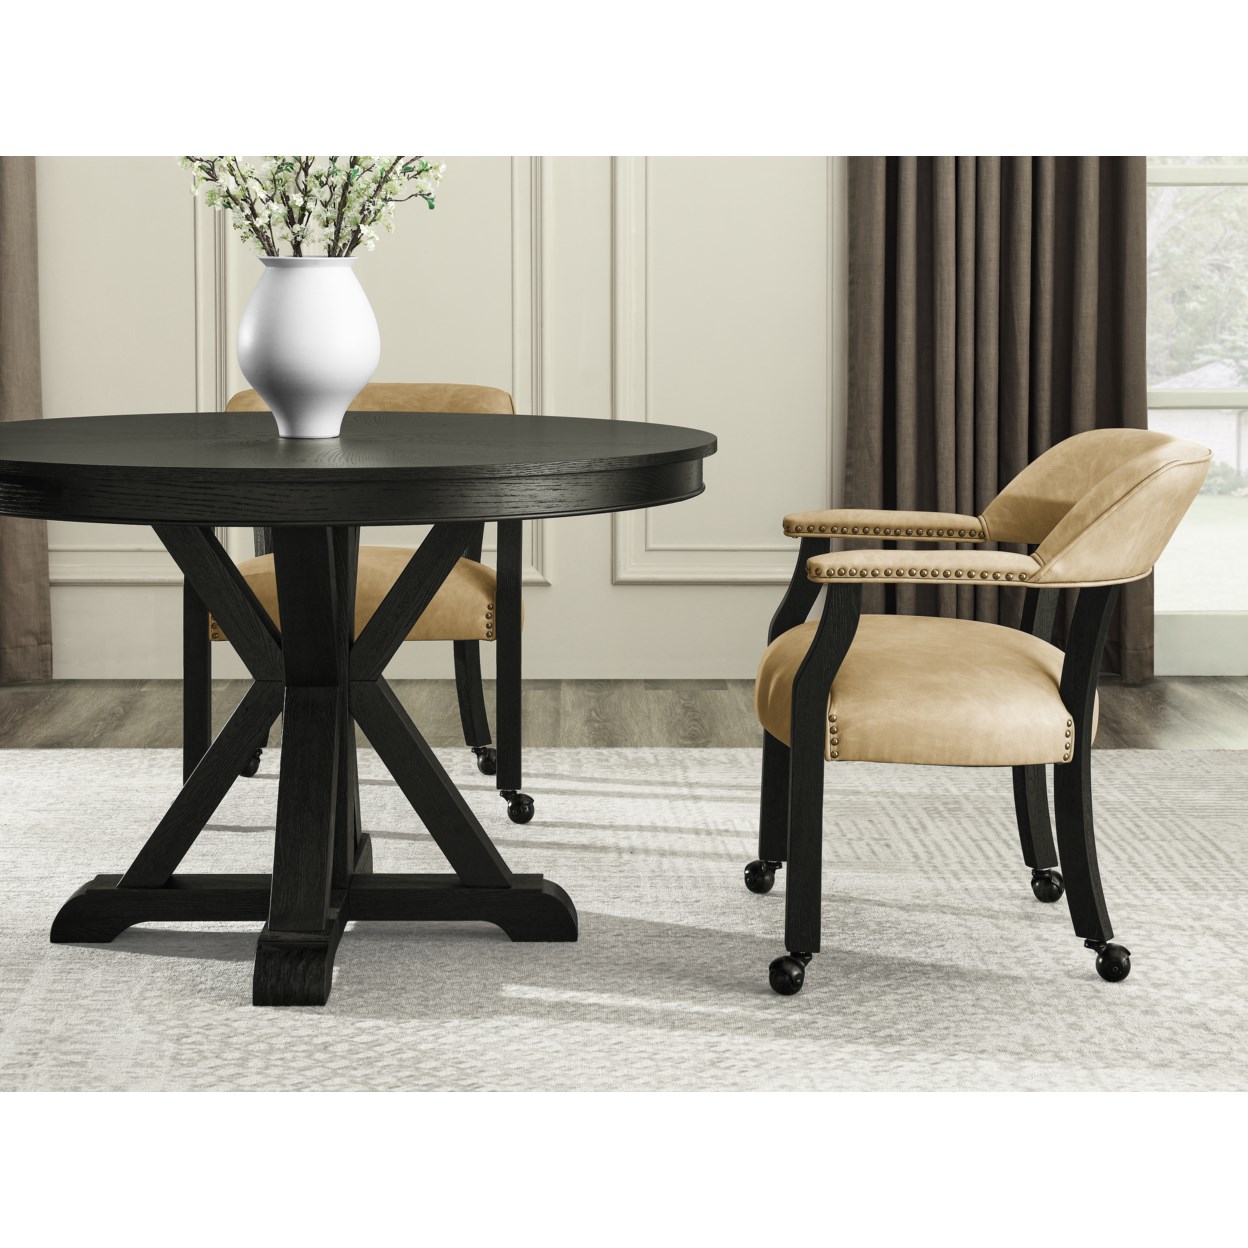 Steve Silver Rylie Dining Game Chair